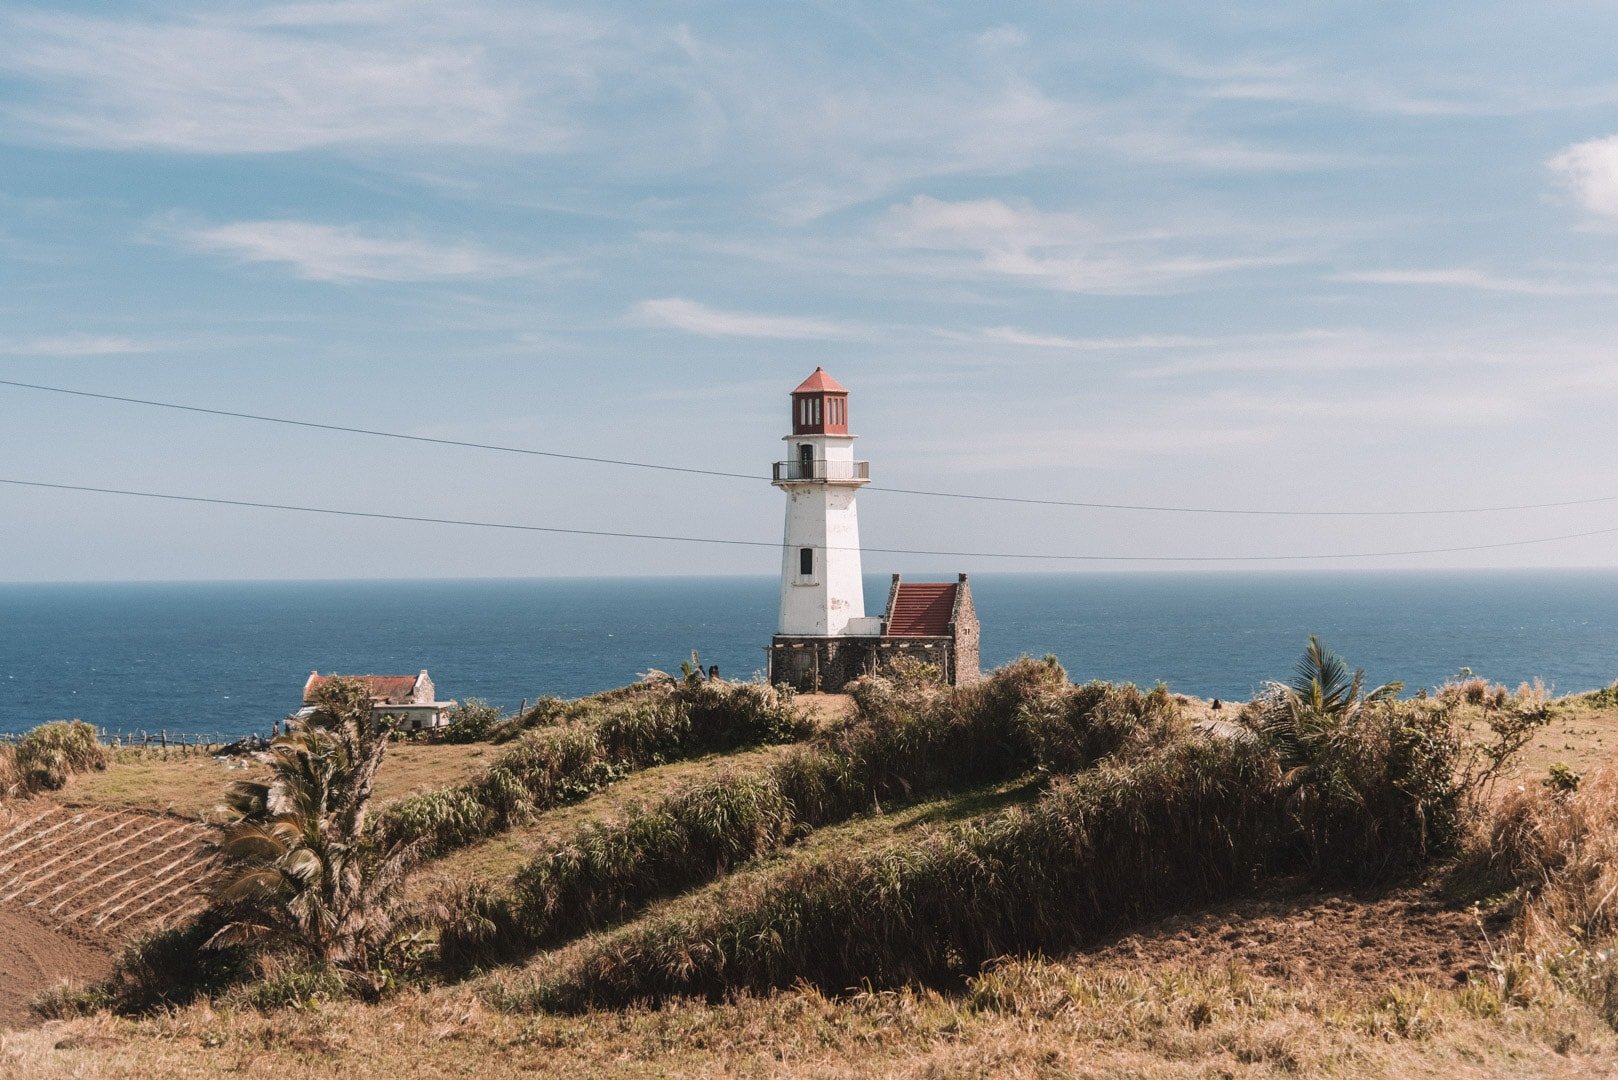 batanes itinerary, Transportation around Batanes, Batanes tourist spots, atms in batanes, wifi connection in batanes, how to go to Batanes, Tayid lighthouse